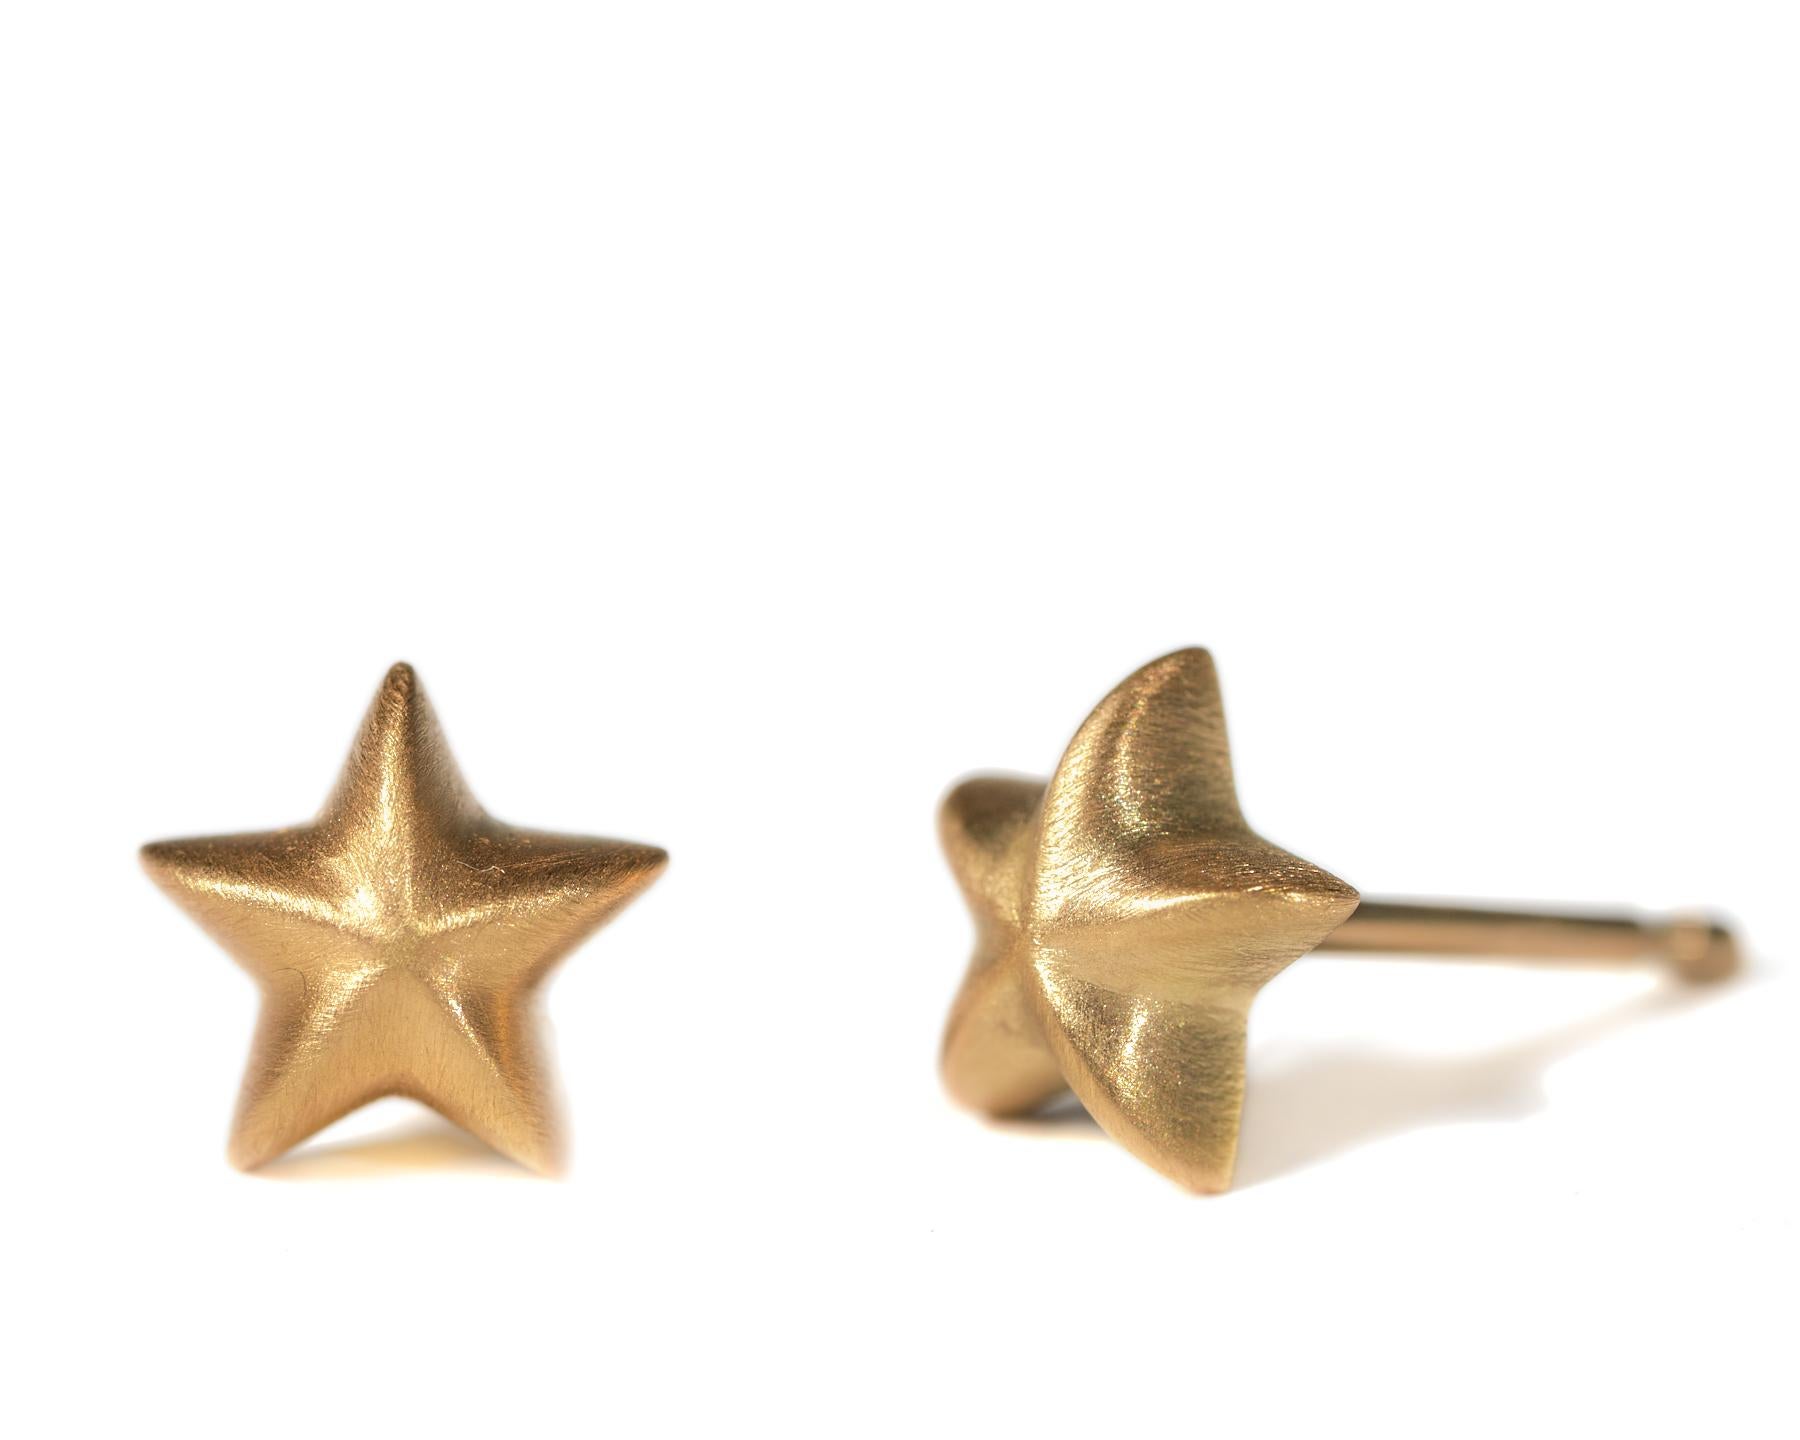 Chunky little star studs -- inspired by motorcycle-jacket details -- are perfect for everyday wear.

18K yellow gold with satin finish.
8 mm x 8 mm
Made in New York City